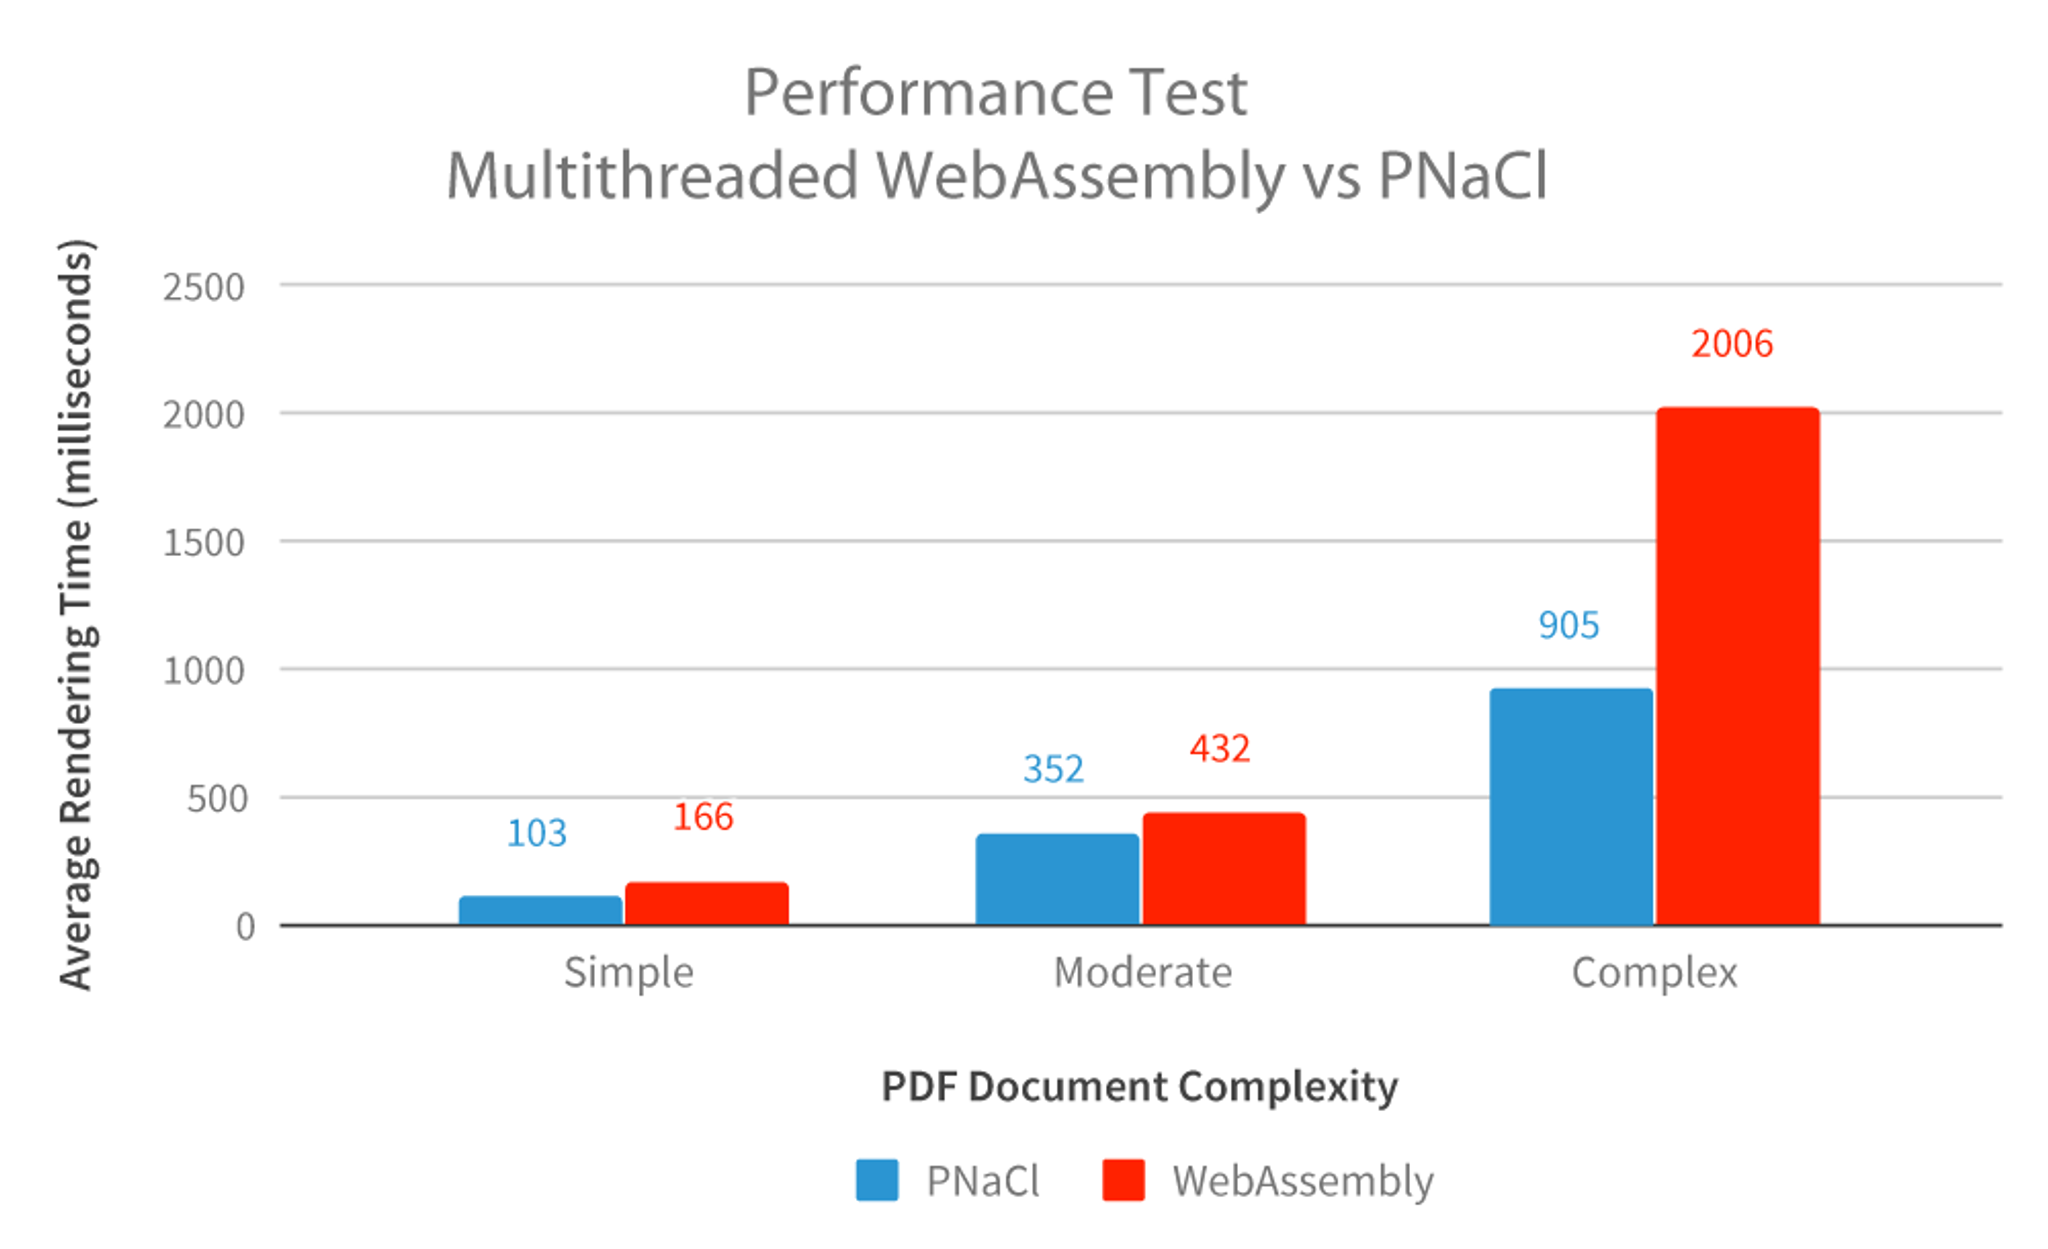 Performance test results of WebAssembly vs PNaCL